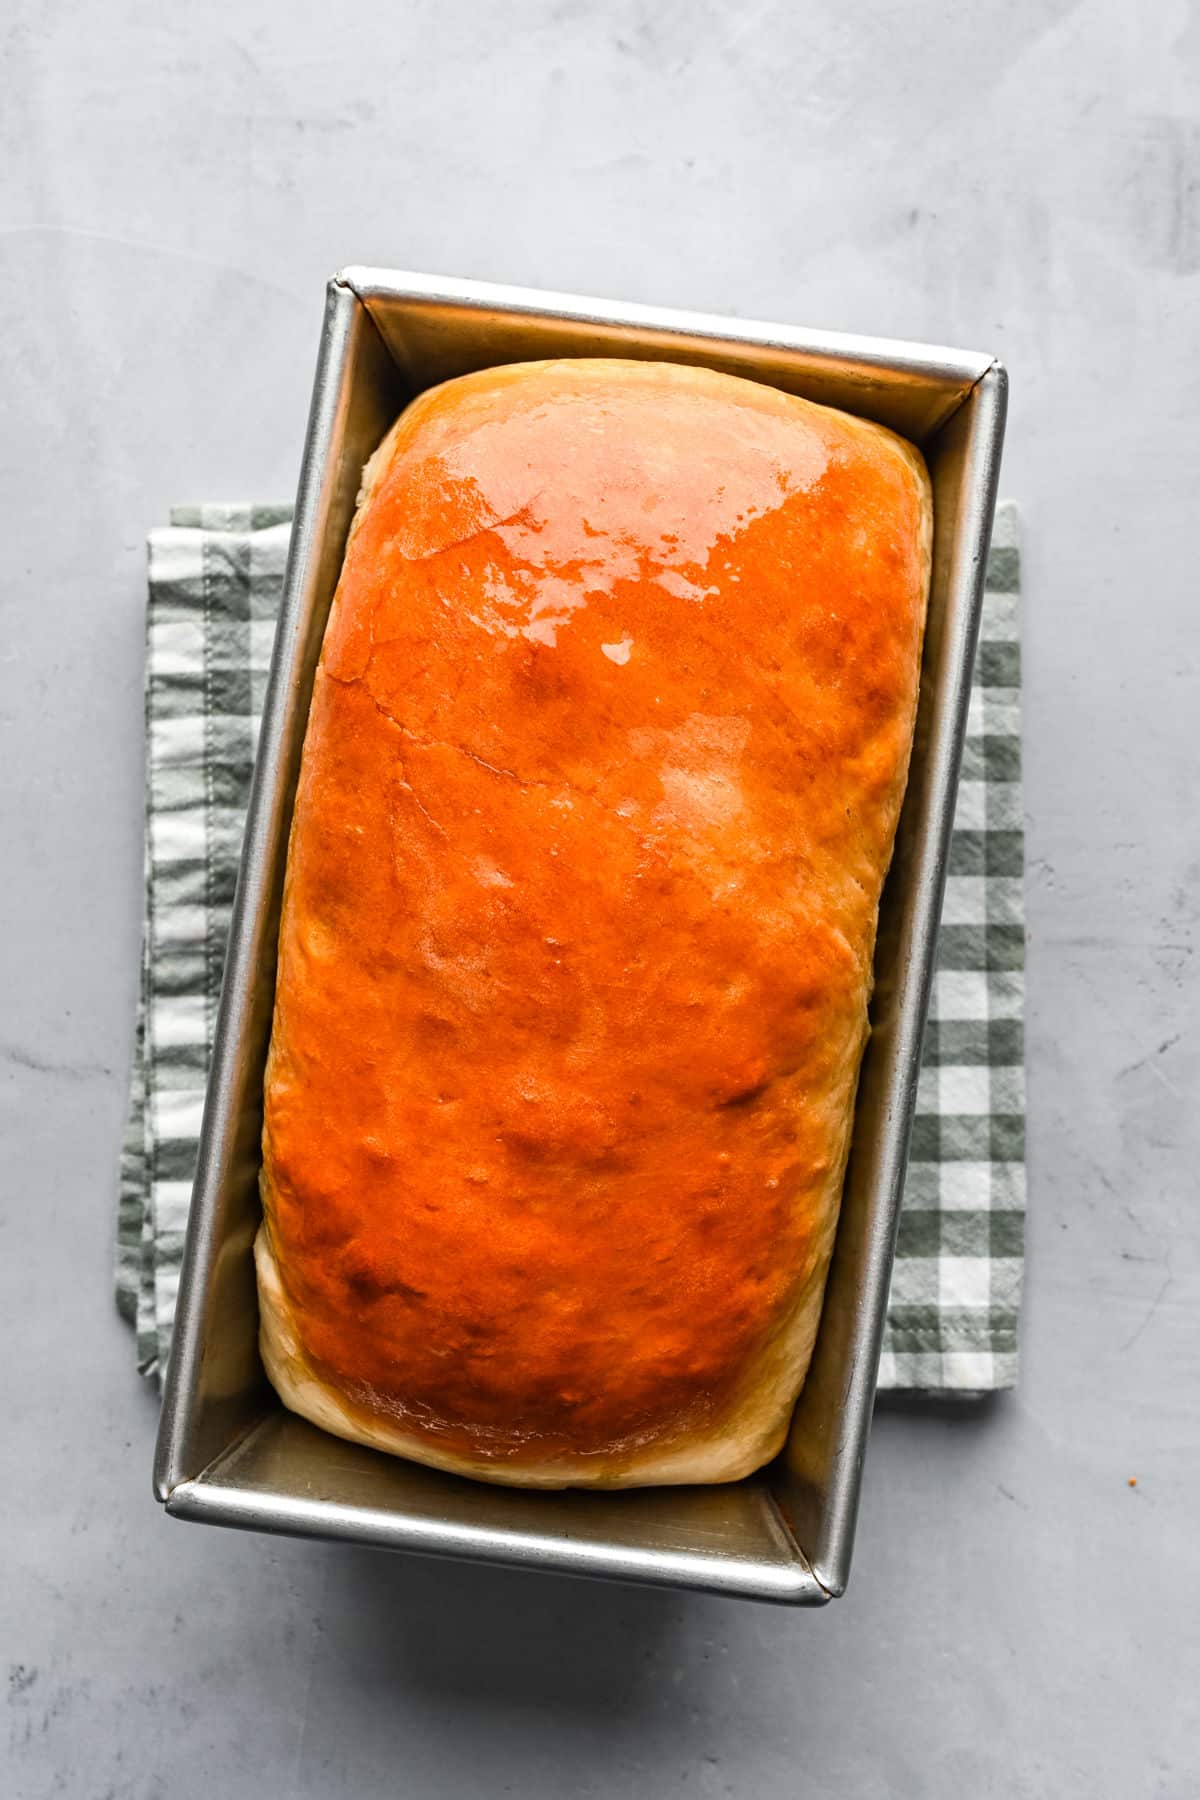 A baked loaf of homemade white bread brushed with melted butter.